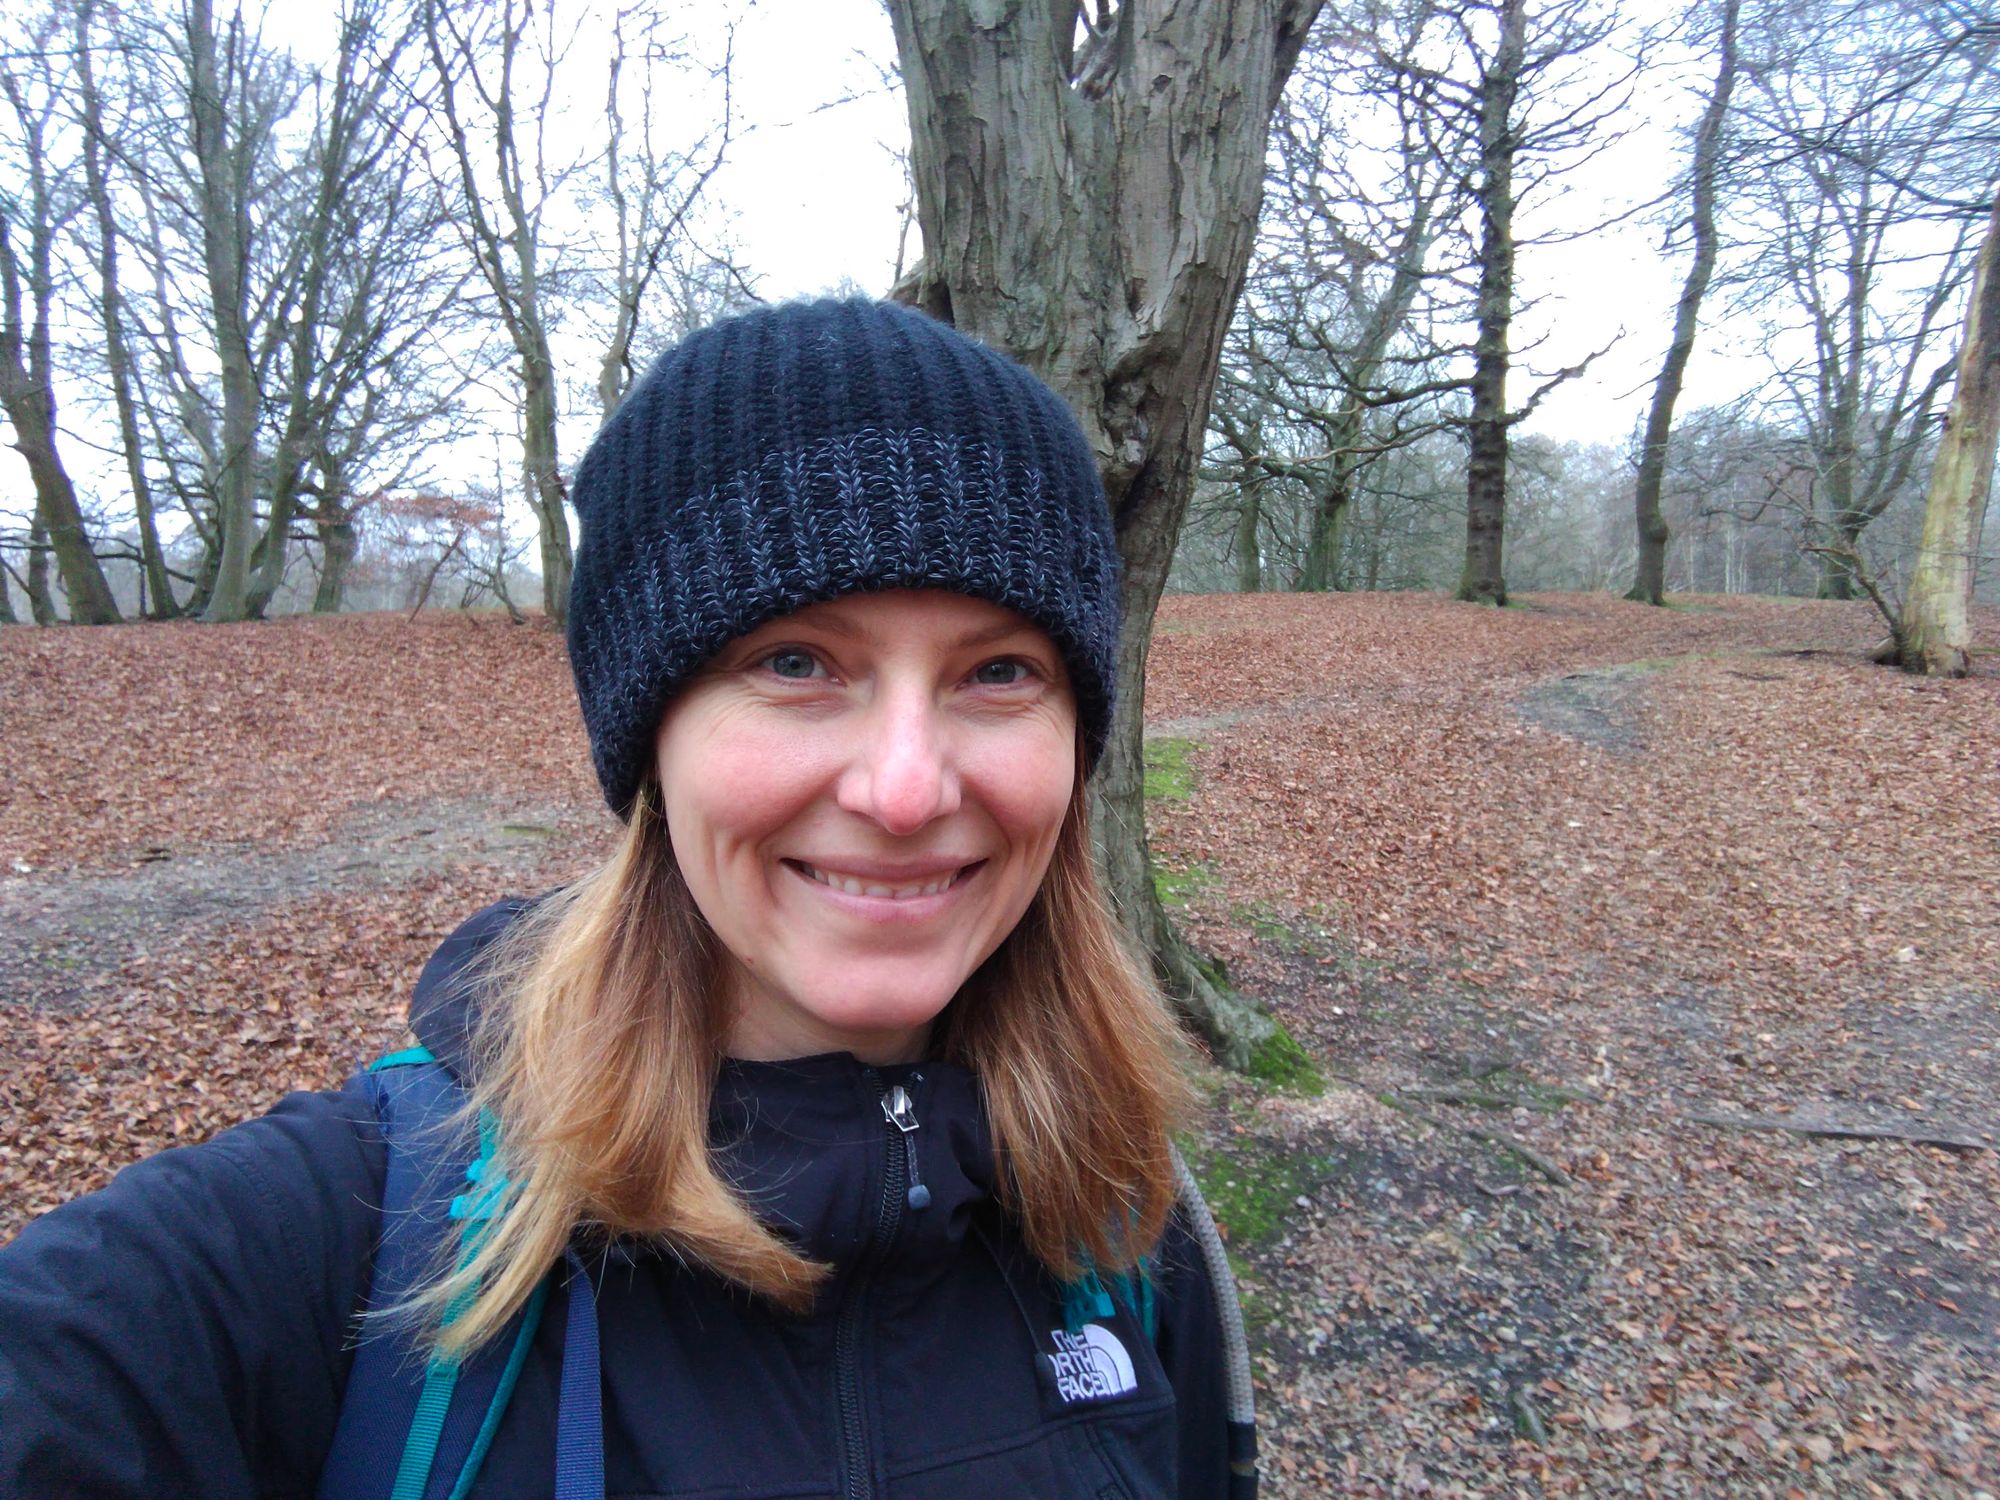 Sam standing in Epping Forest wearing a beanie